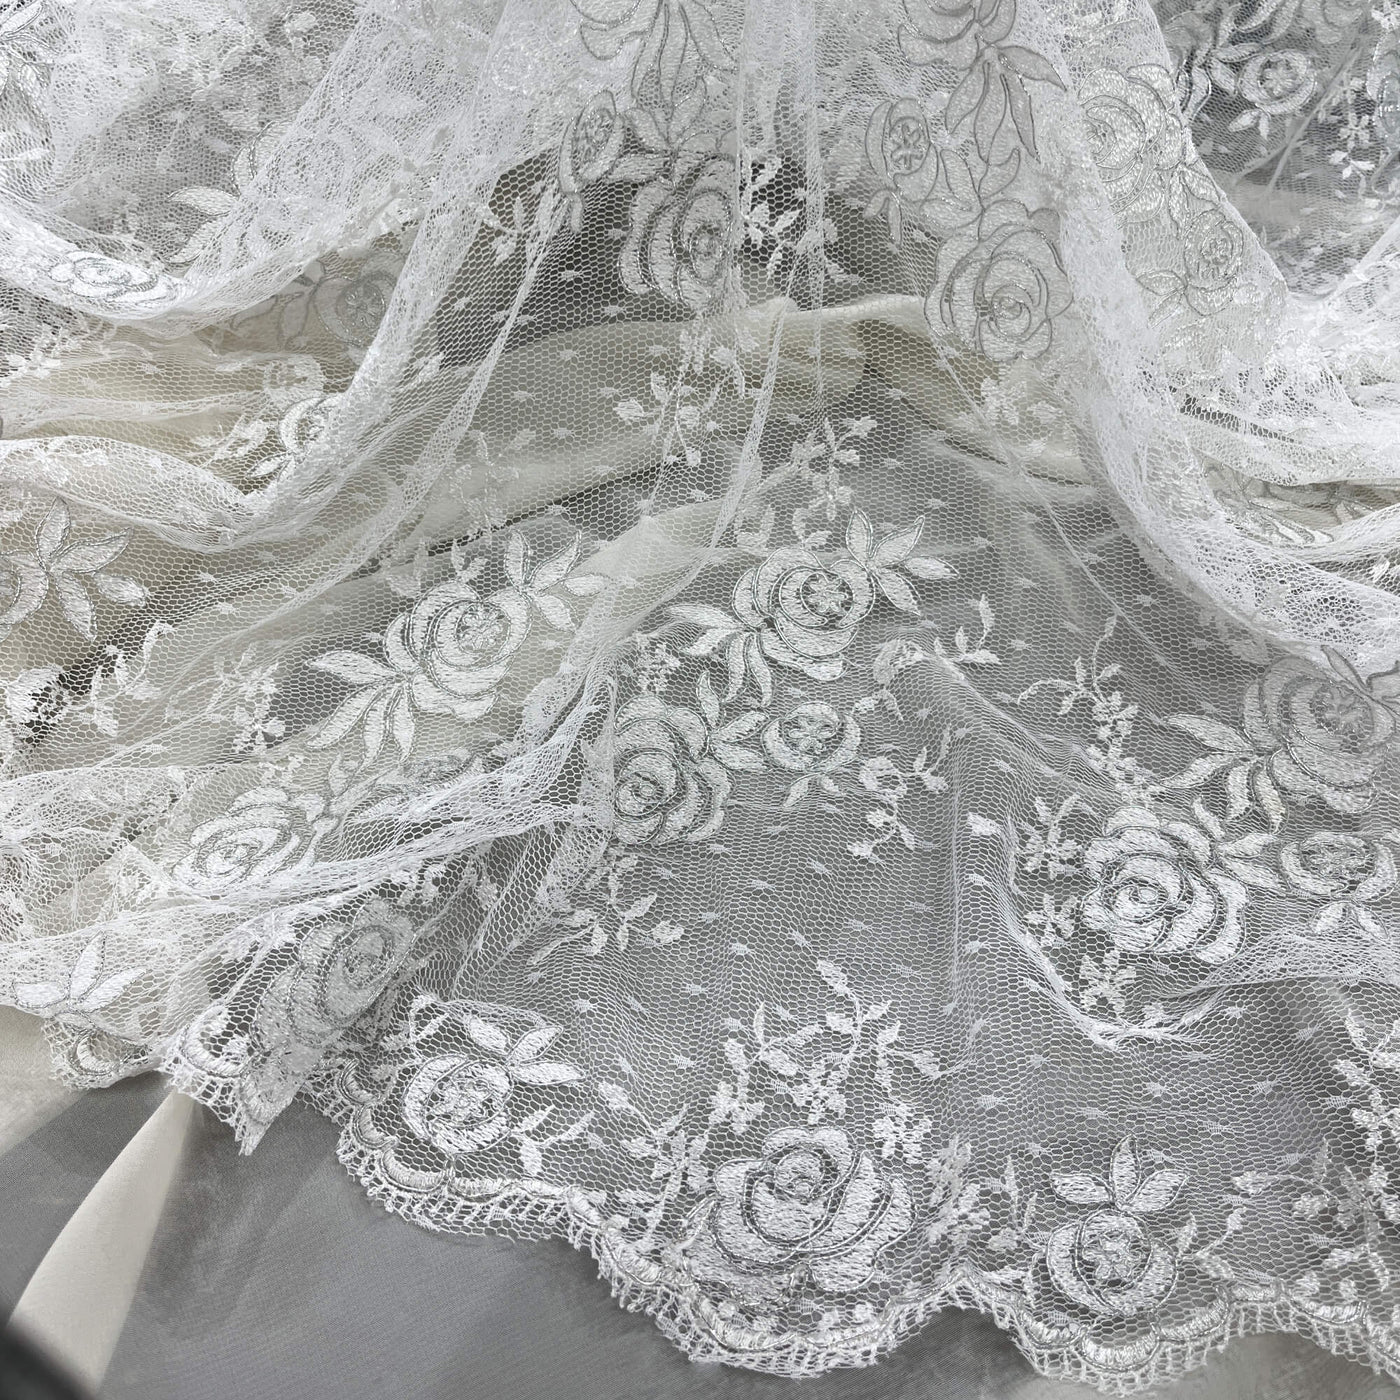 Corded Bridal Lace Fabric Embroidered on 100% Polyester Net Mesh | Lace USA - 96700W